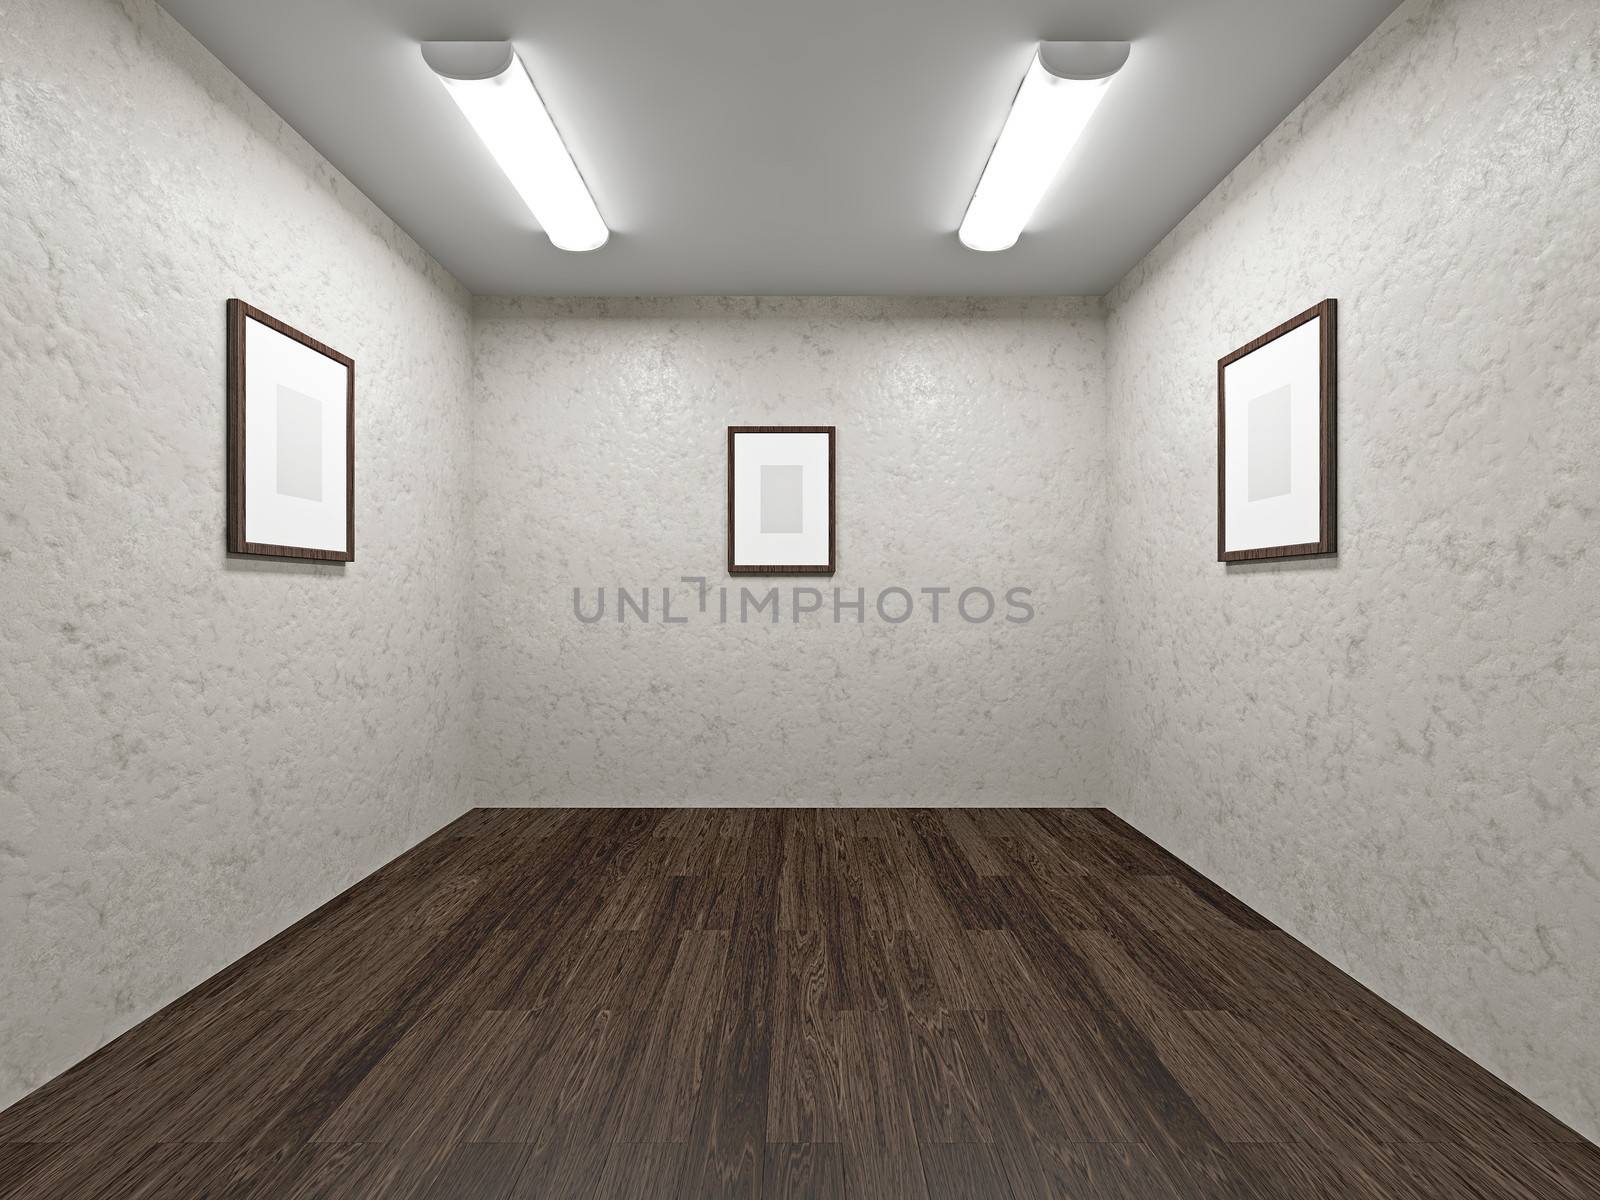 Gallery with blank pictures by Astragal